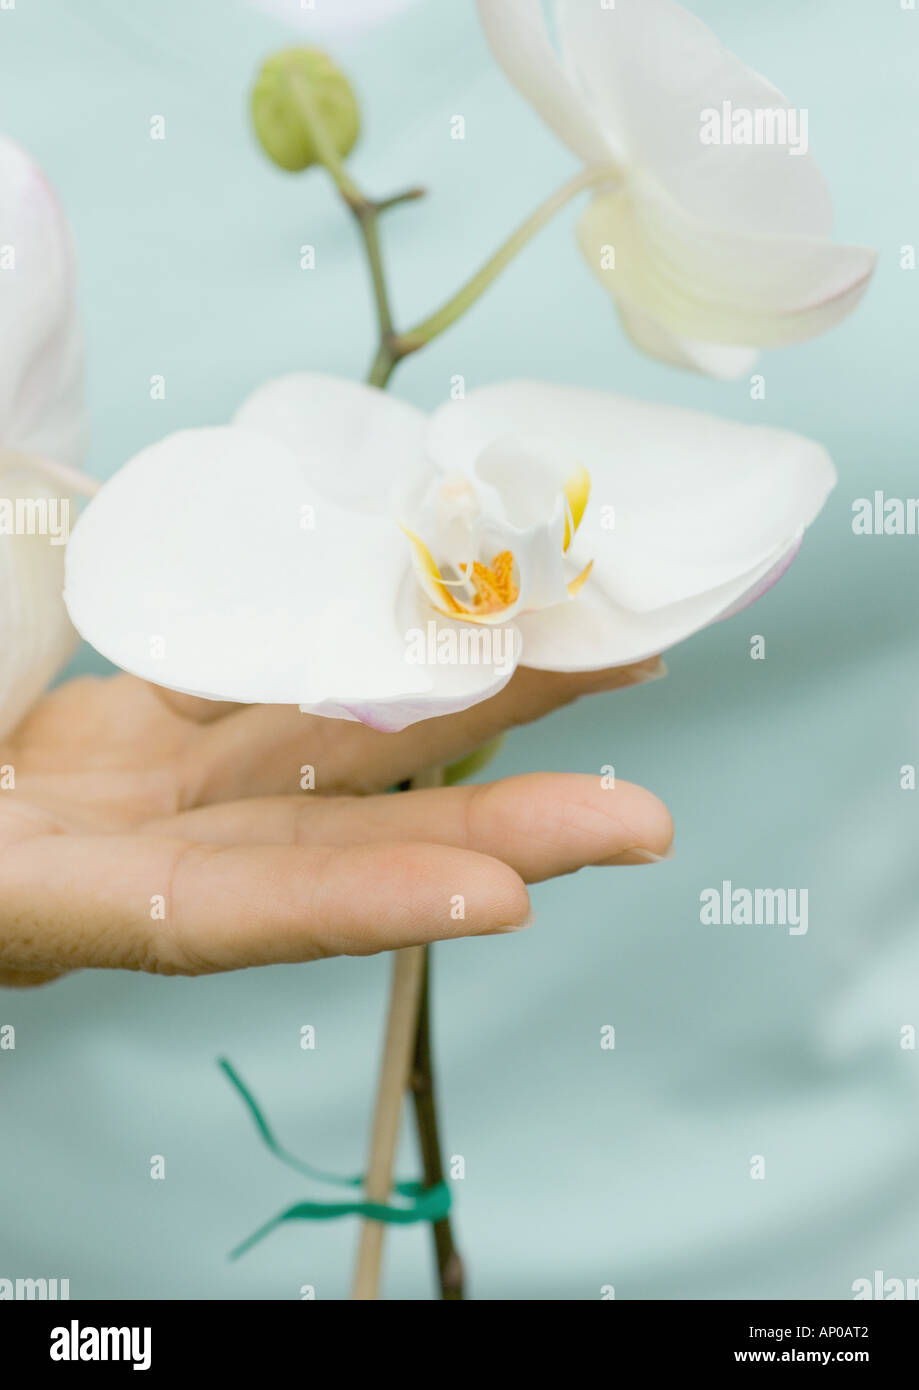 Person's hand under orchid blossom Stock Photo